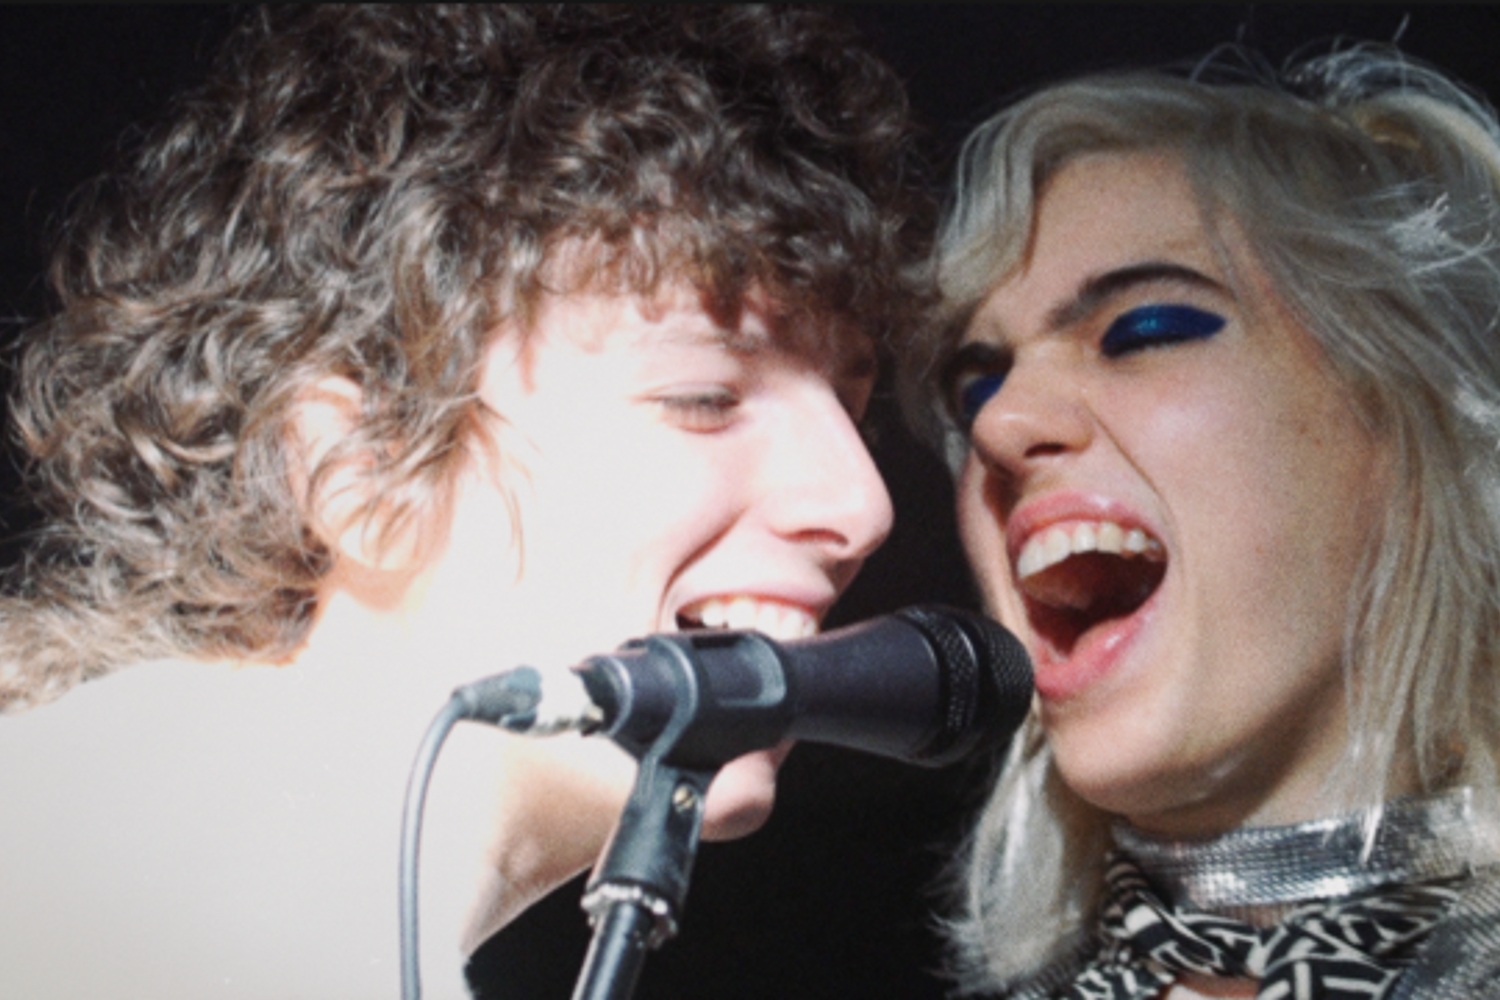 Sunflower Bean document Brooklyn show in new ‘Crisis Fest’ video